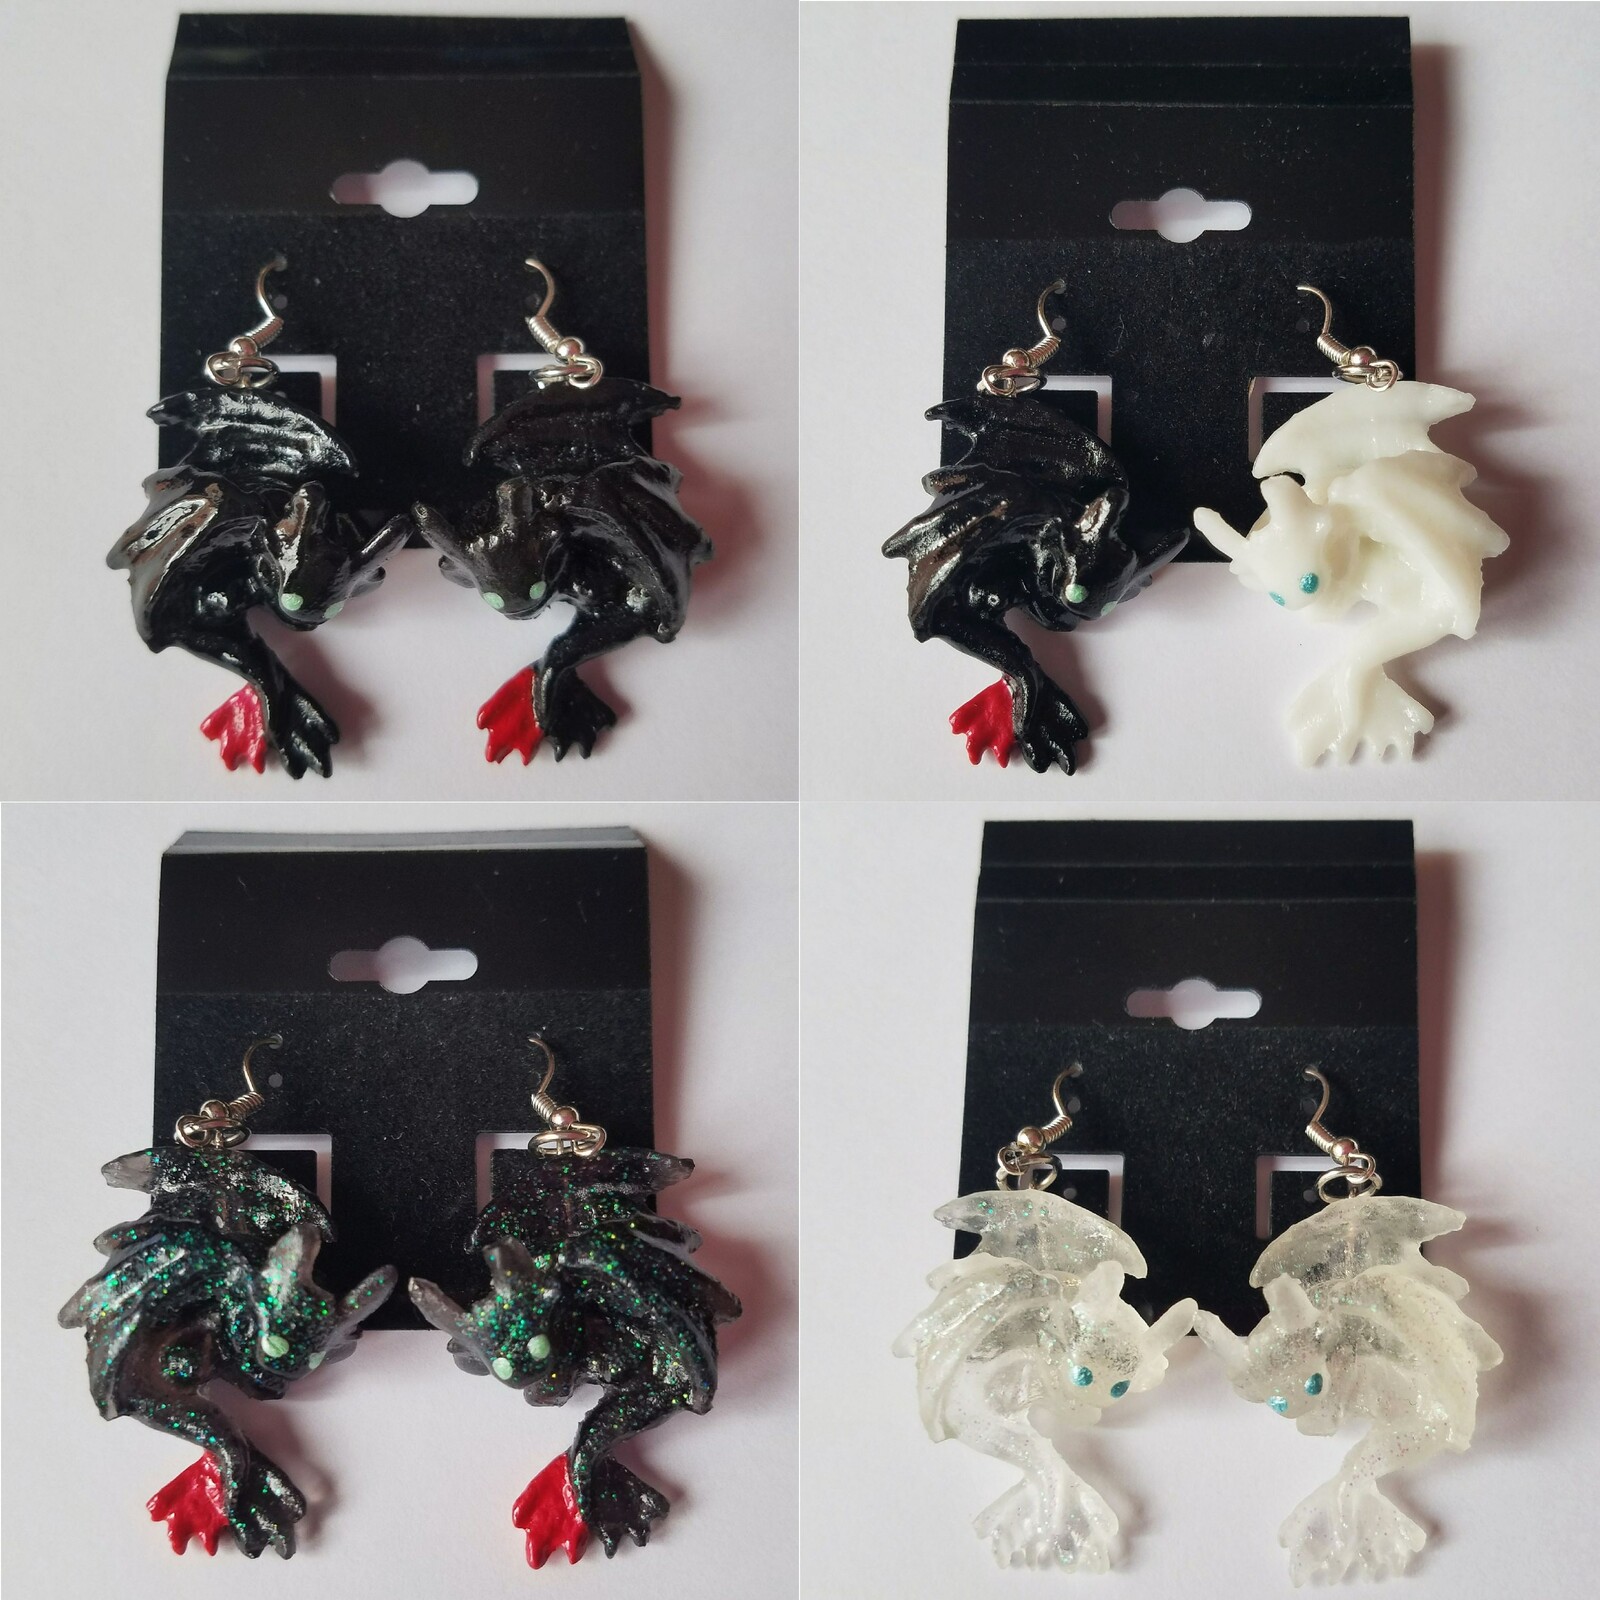 Dwagon earrings of Toothless and Light Fury. Resin cast with hand painted details. Available in different colors. 